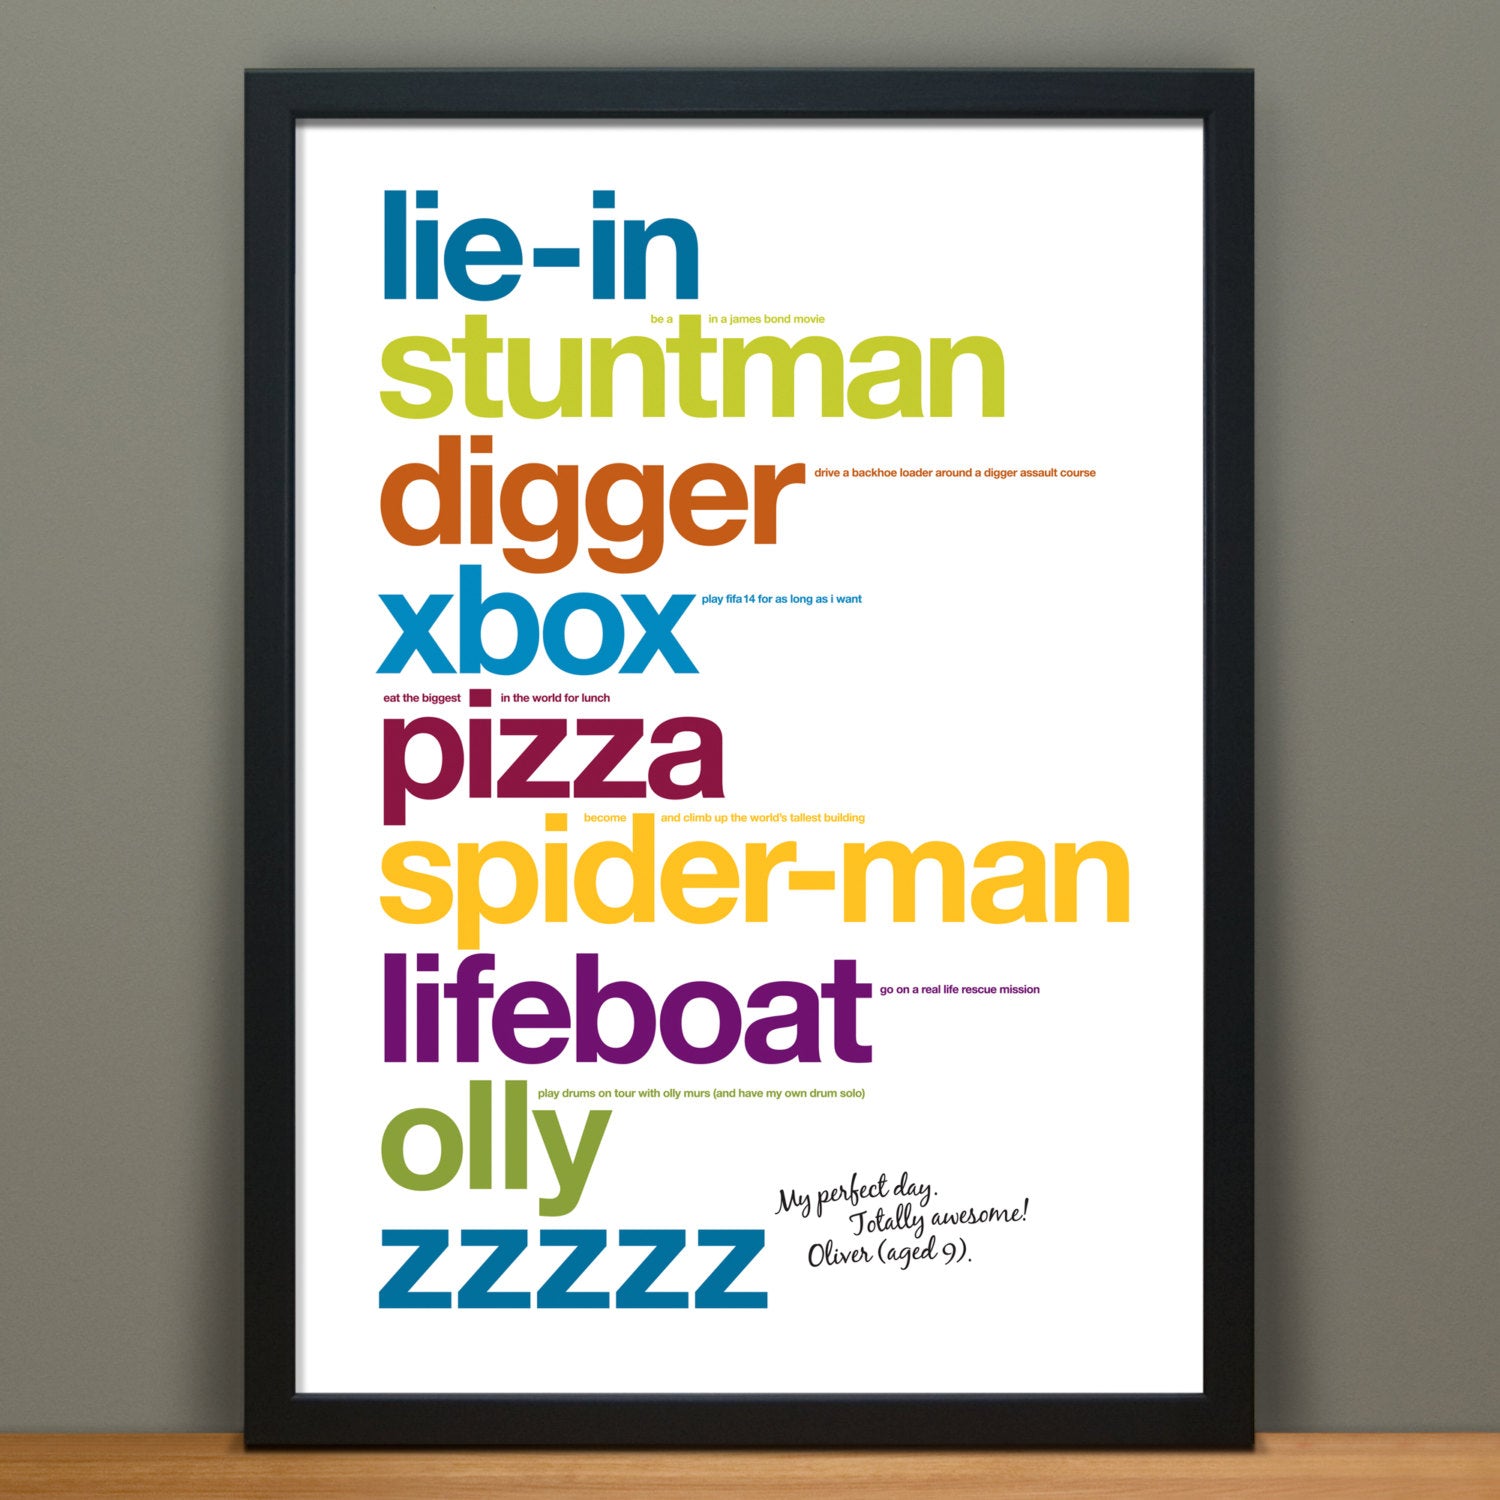 Personalised Print For Kids